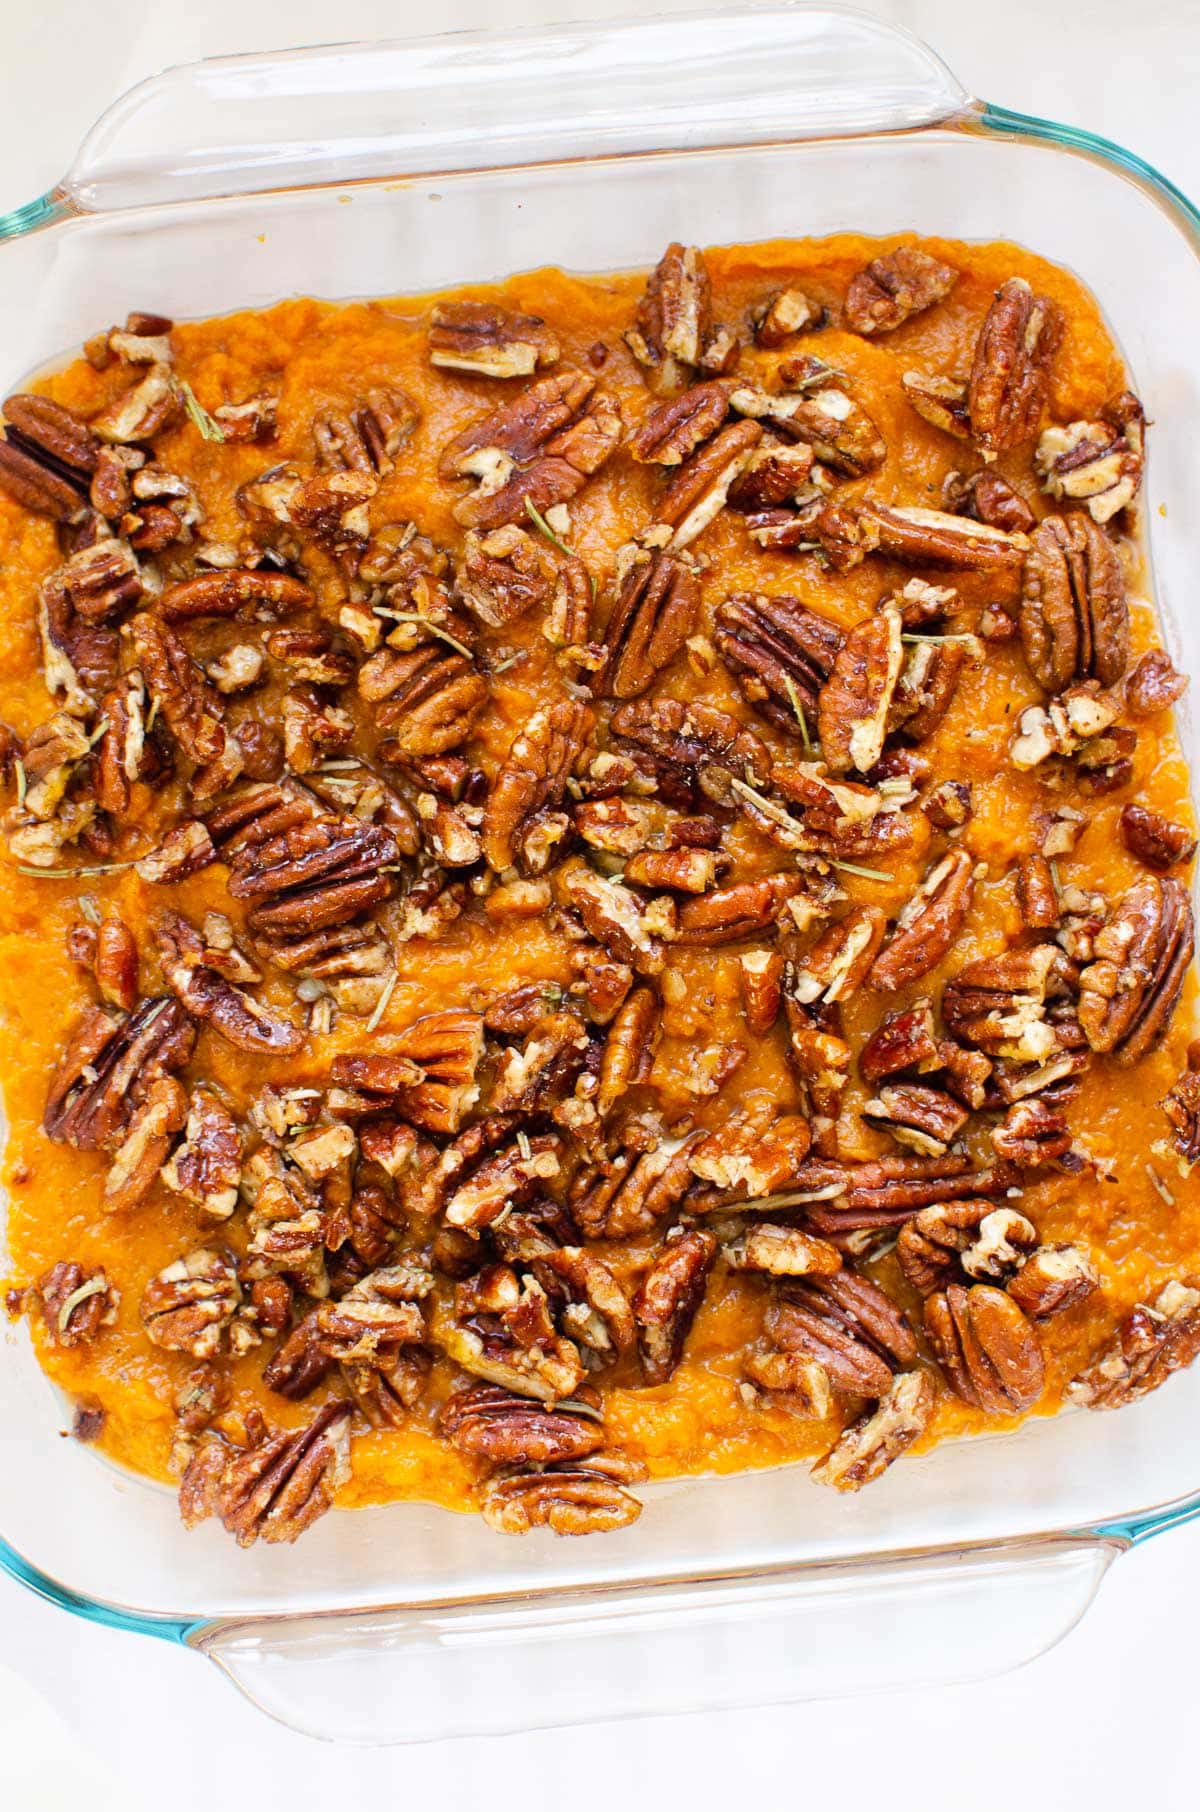 Instant pot sweet potato casserole with pecan topping in glass baking dish.